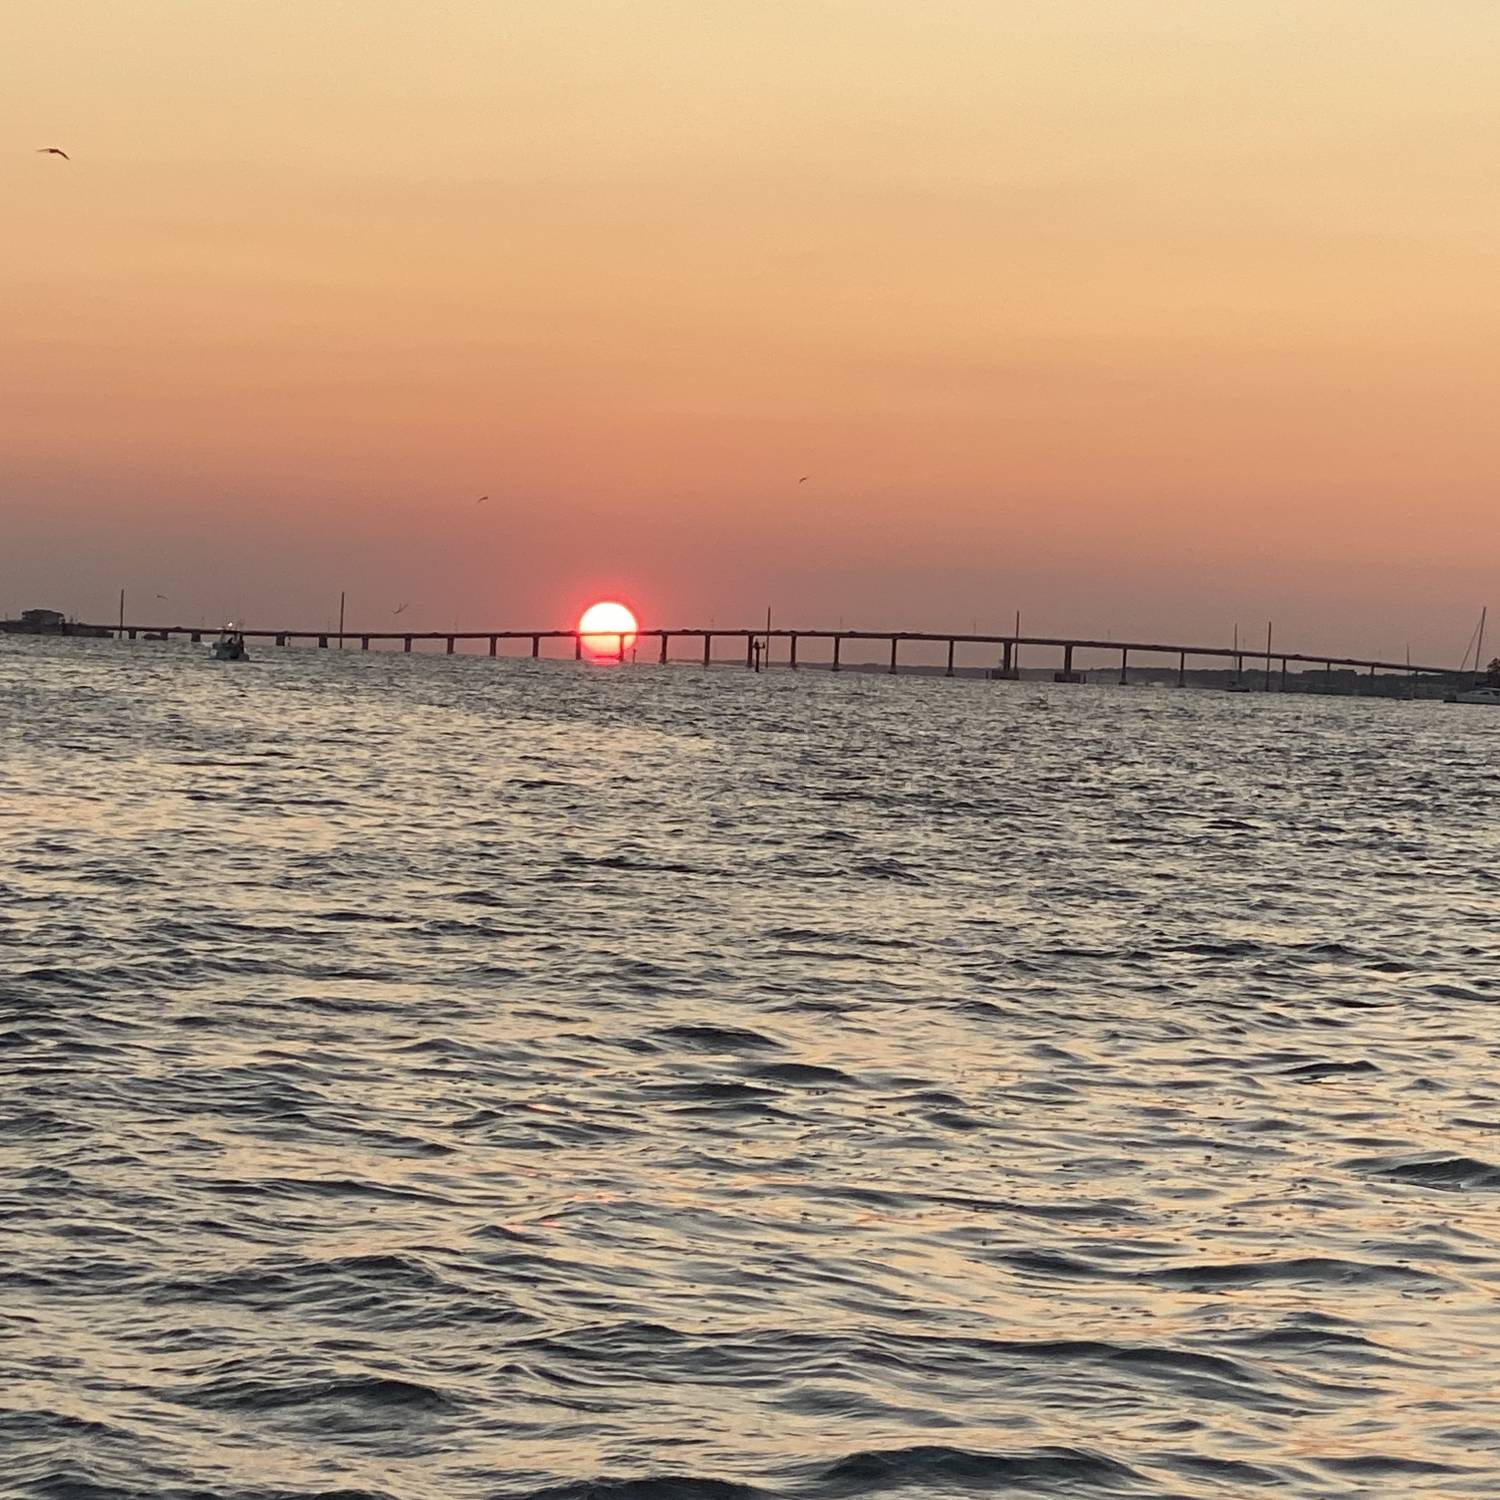 Title: Atlantic beach sunset - On board their Sportsman Masters 227 Bay Boat - Location: Icw in Morehead city. Participating in the Photo Contest #SportsmanNovember